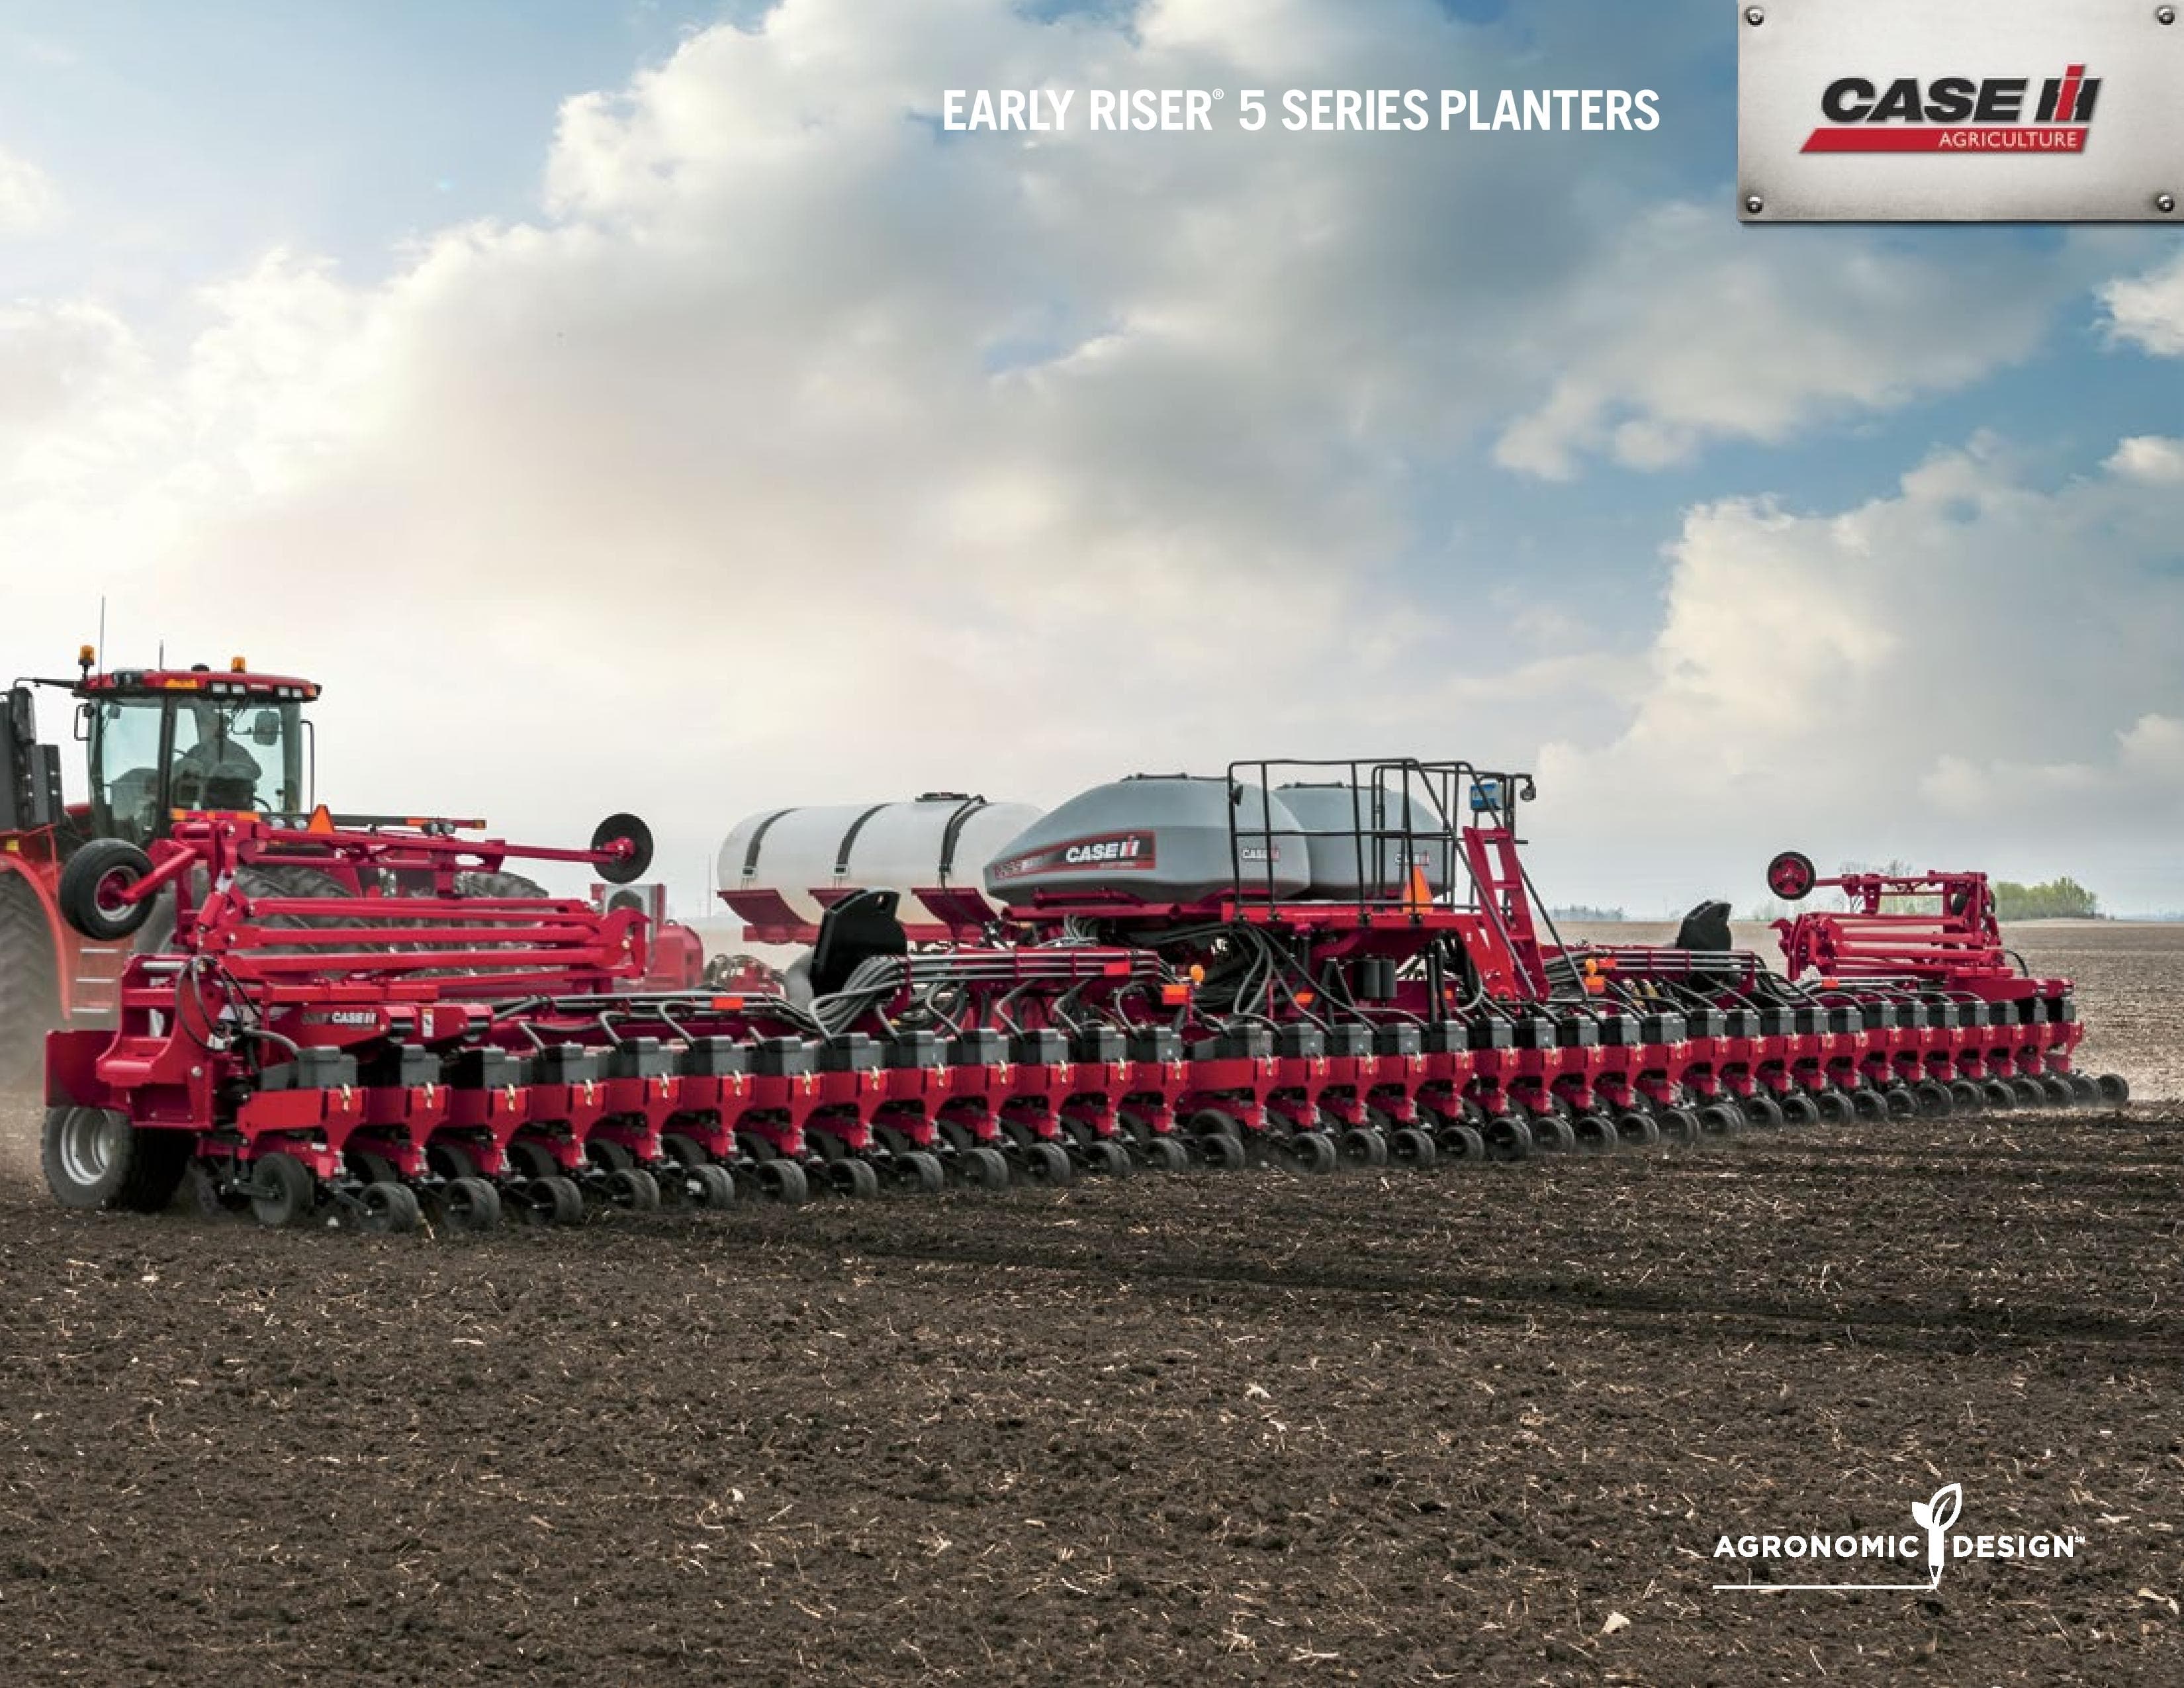 Go to centralilag.com (Early%20Riser%205%20Series%20Planter_Brochure_03-14_CIH01031401 subpage)